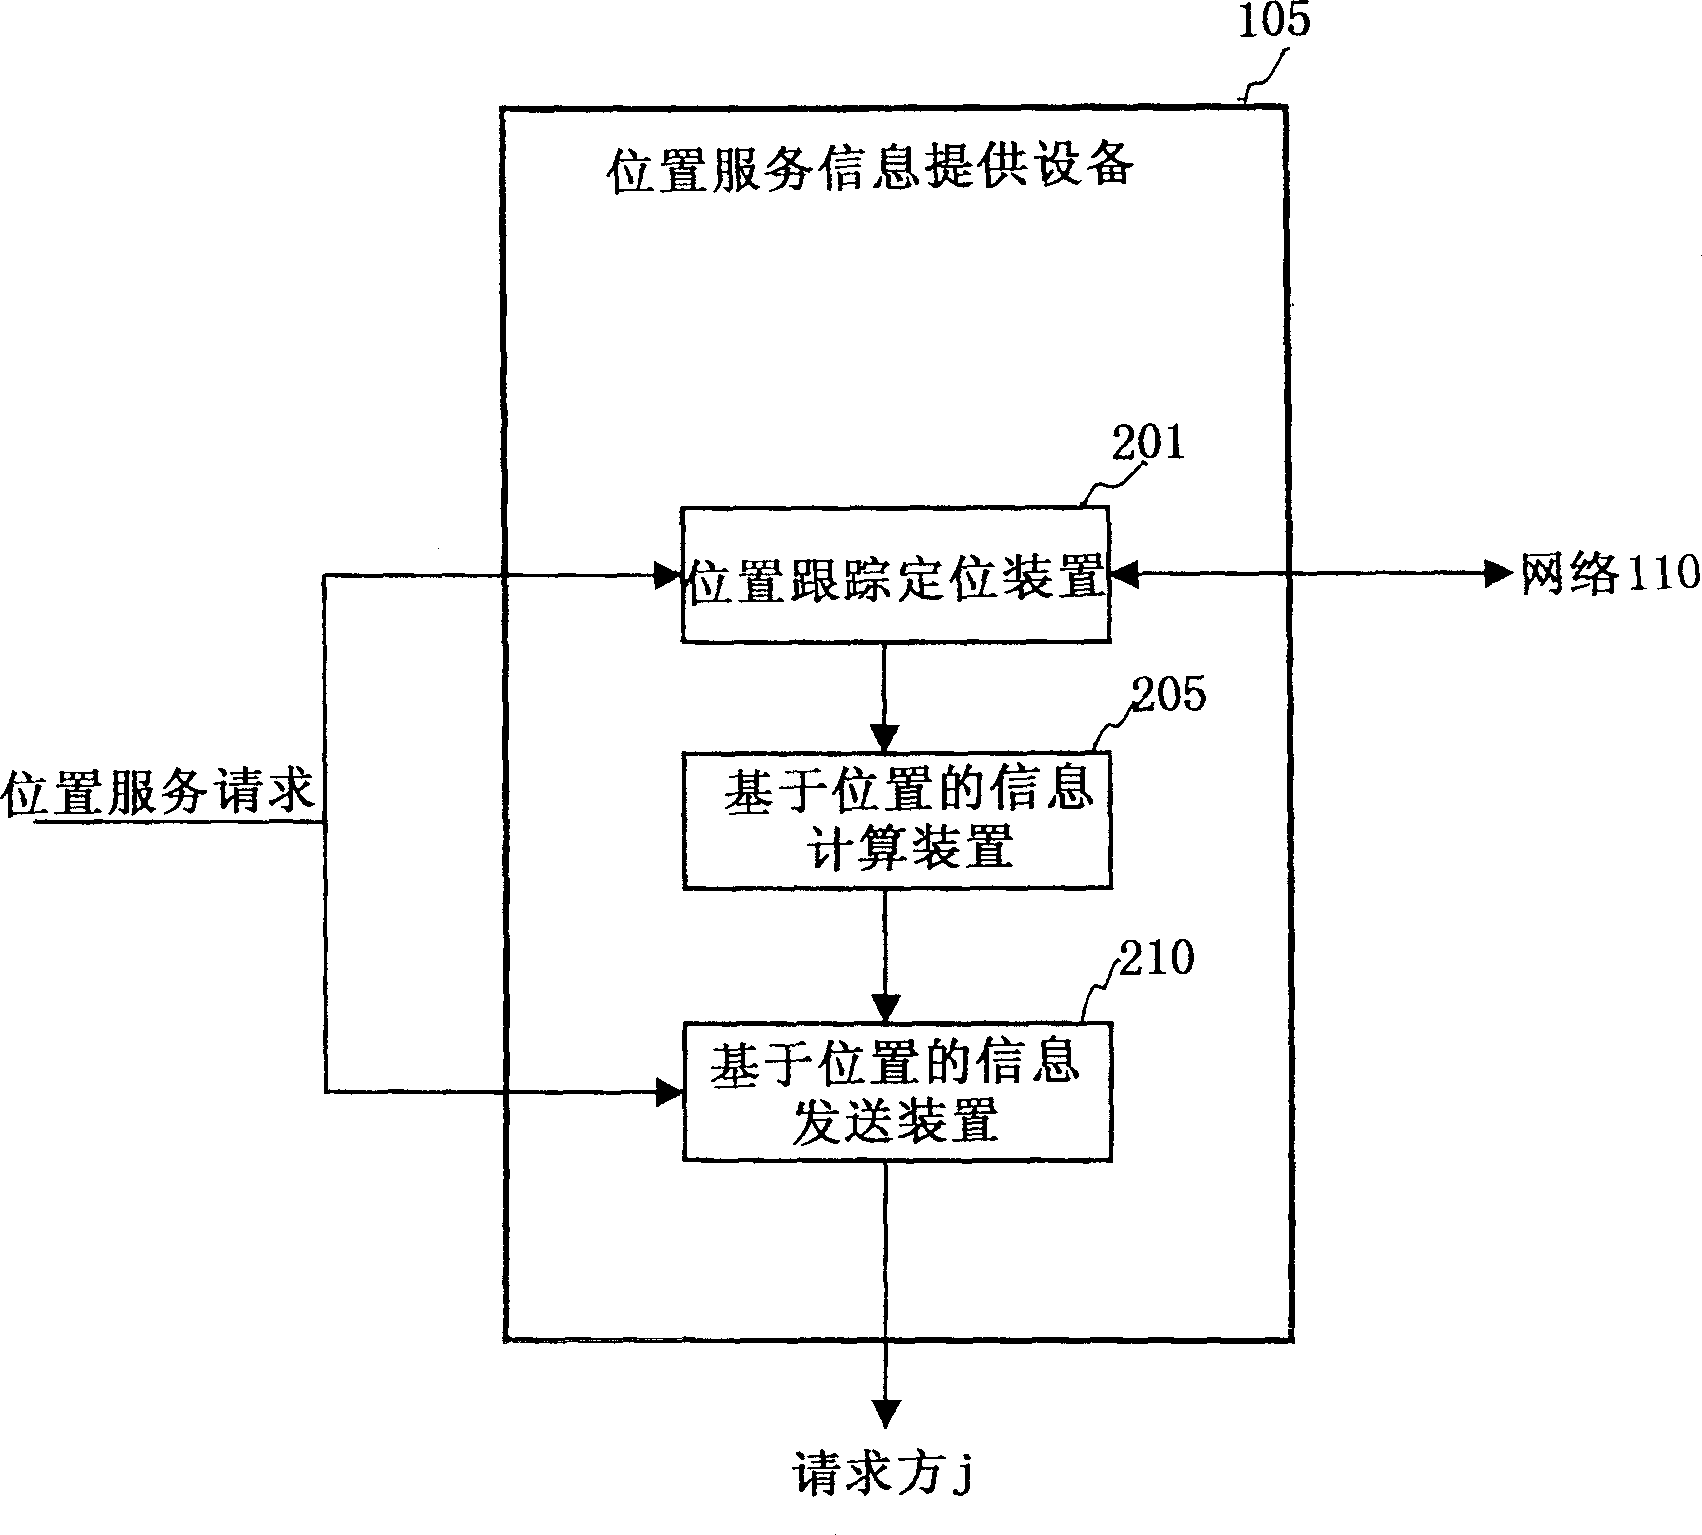 Information providing system, device, method and popular operation device based on geological location